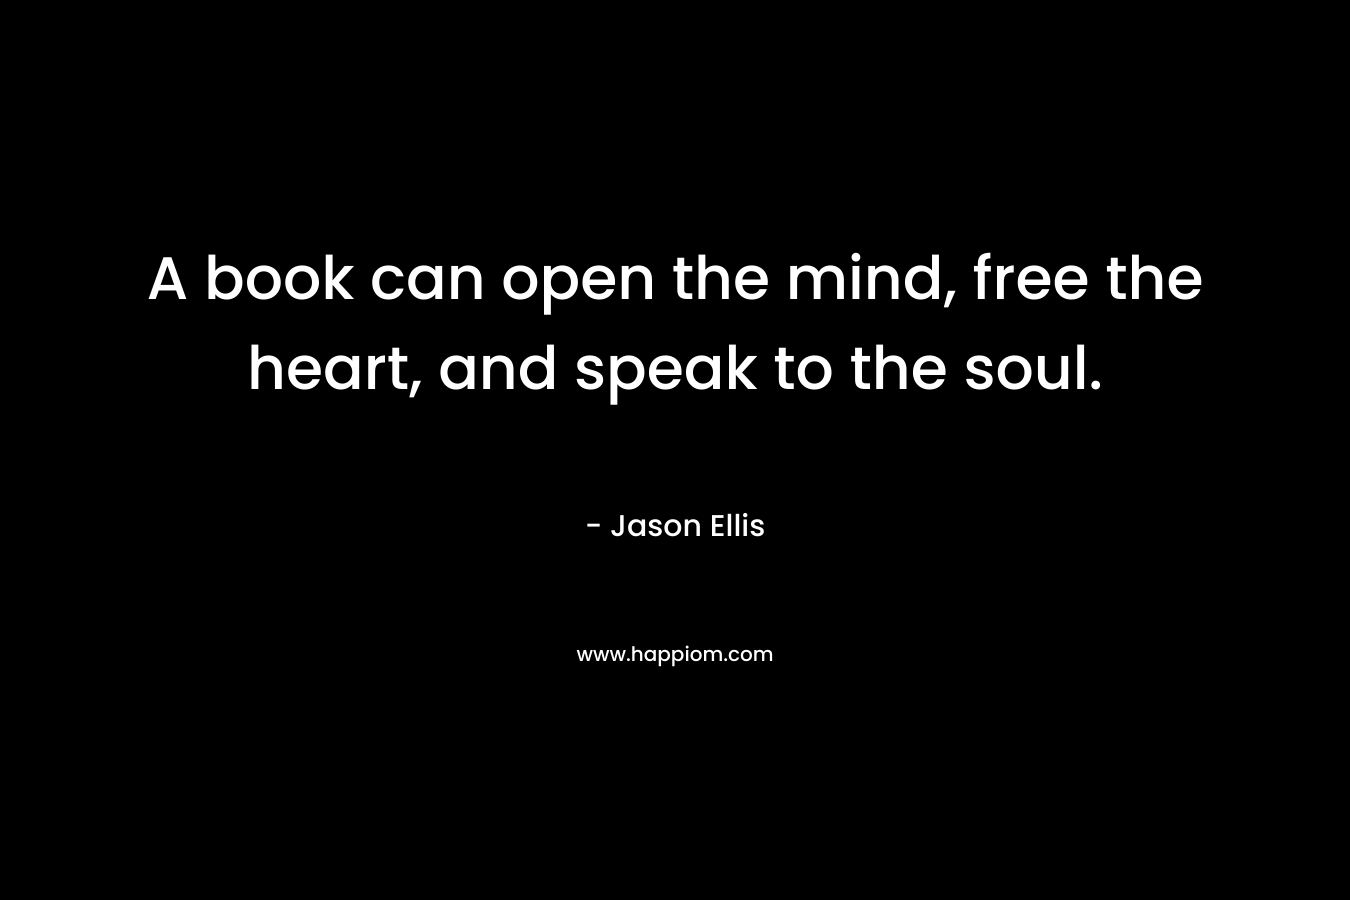 A book can open the mind, free the heart, and speak to the soul.